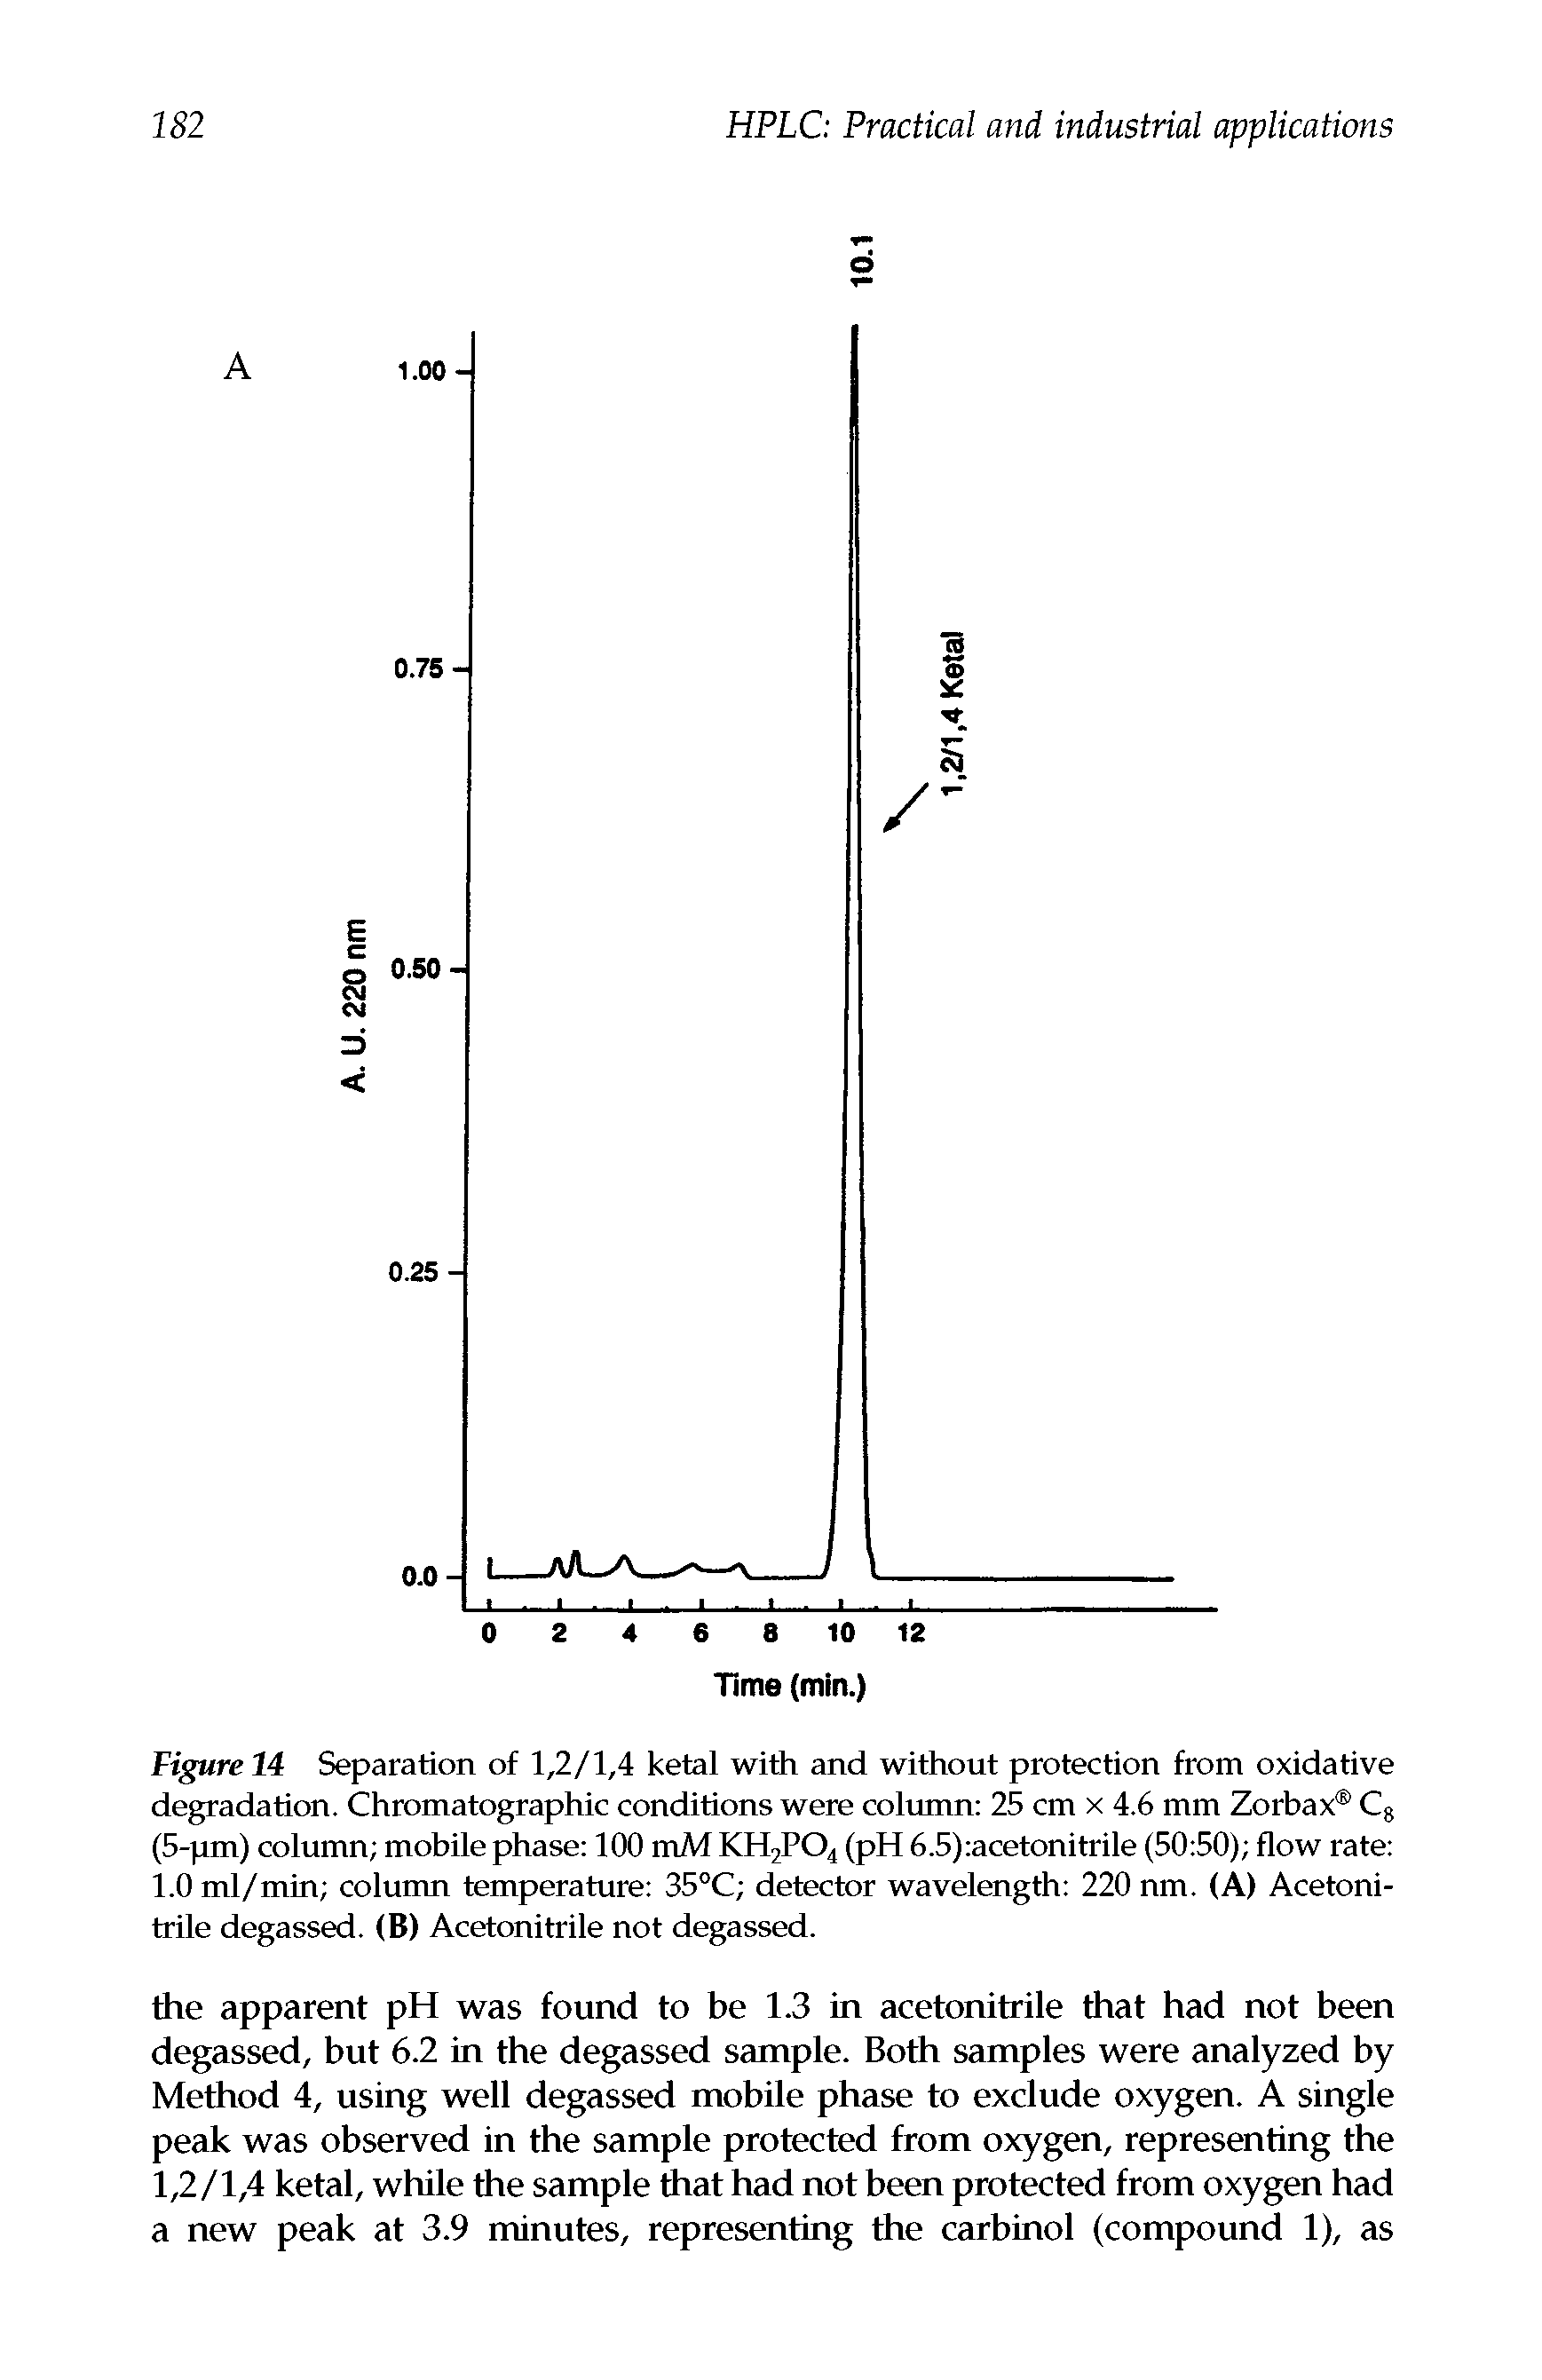 Figure 14 Separation of 1,2/1,4 ketal with and without protection from oxidative degradation. Chromatographic conditions were column 25 cm x 4.6 mm Zorbax C8 (5-pm) column mobile phase 100 mM KH2P04 (pH 6.5) acetonitrile (50 50) flow rate 1.0 ml/min column temperature 35°C detector wavelength 220 nm. (A) Acetonitrile degassed. (B) Acetonitrile not degassed.